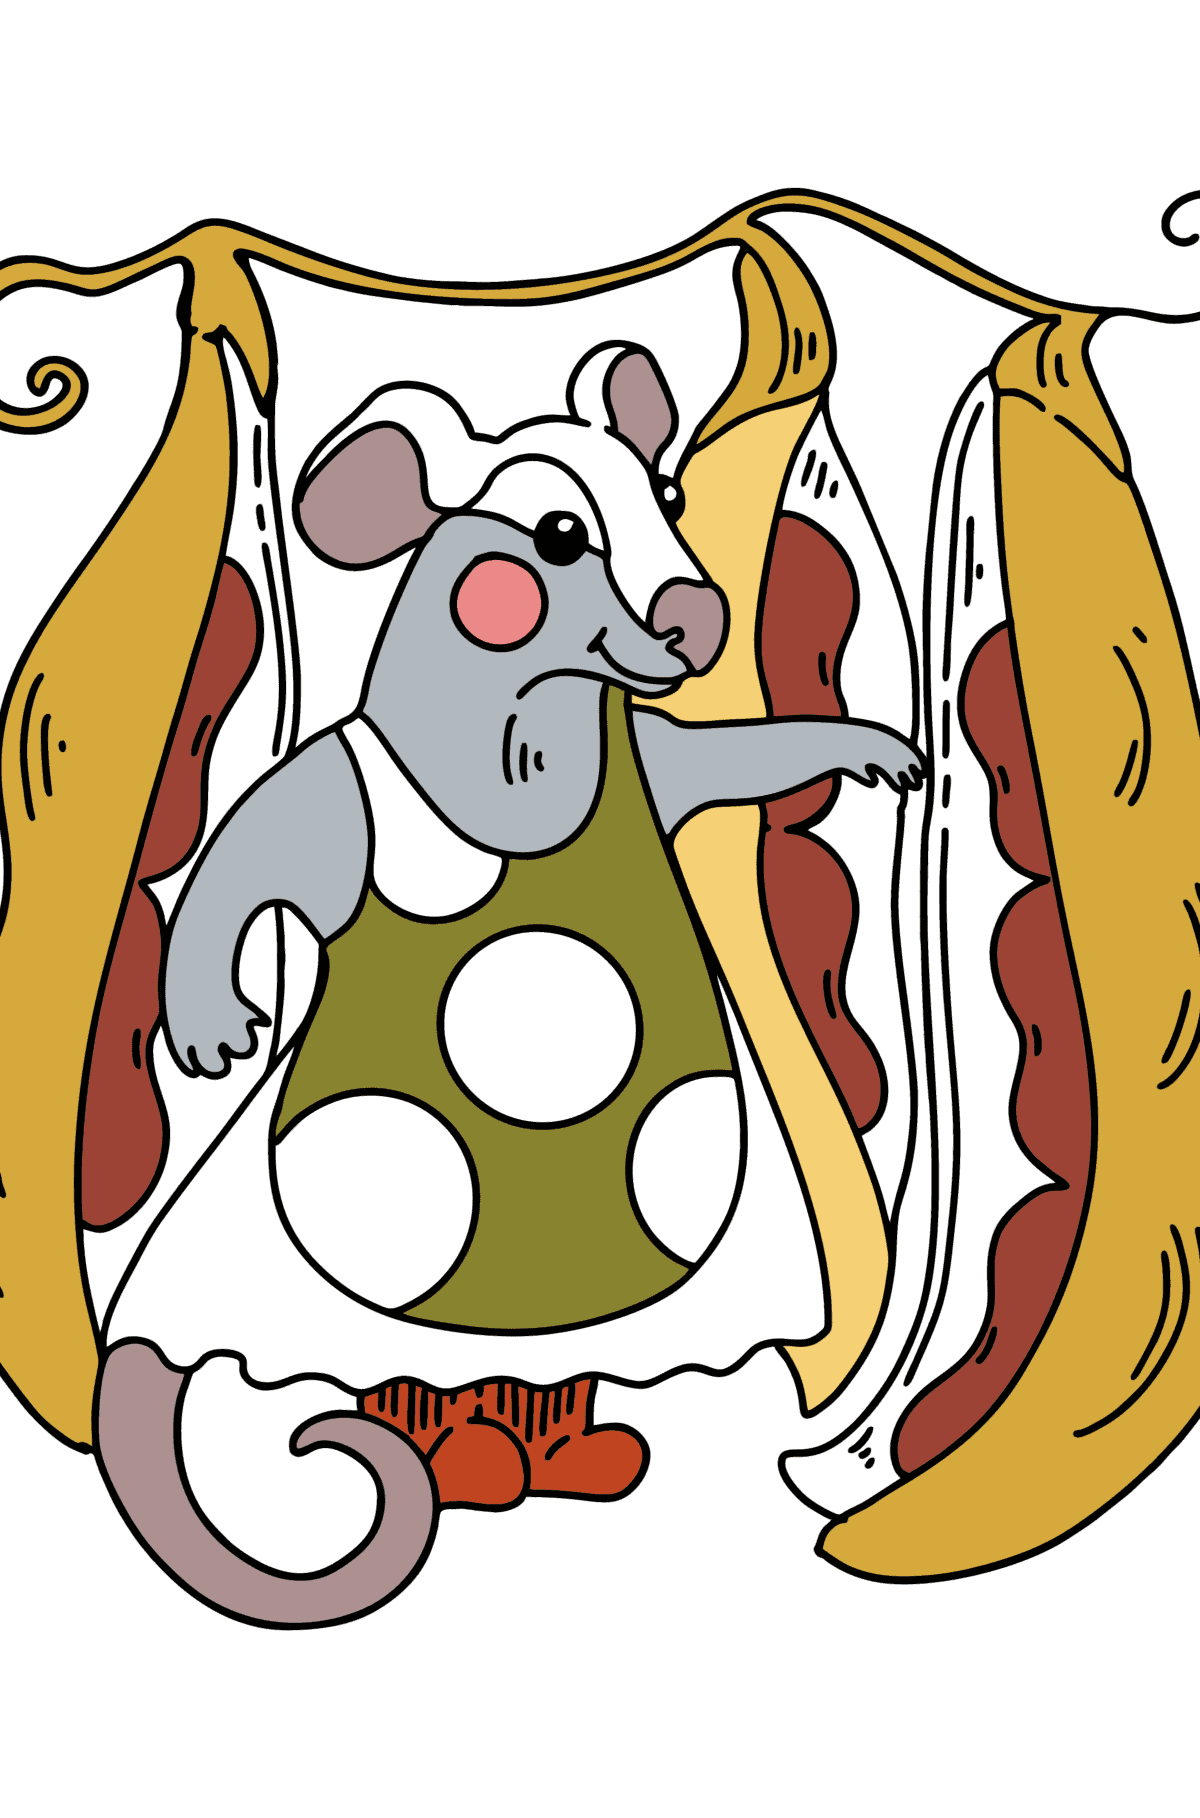 Coloring page - Cute Mouse - Coloring Pages for Kids